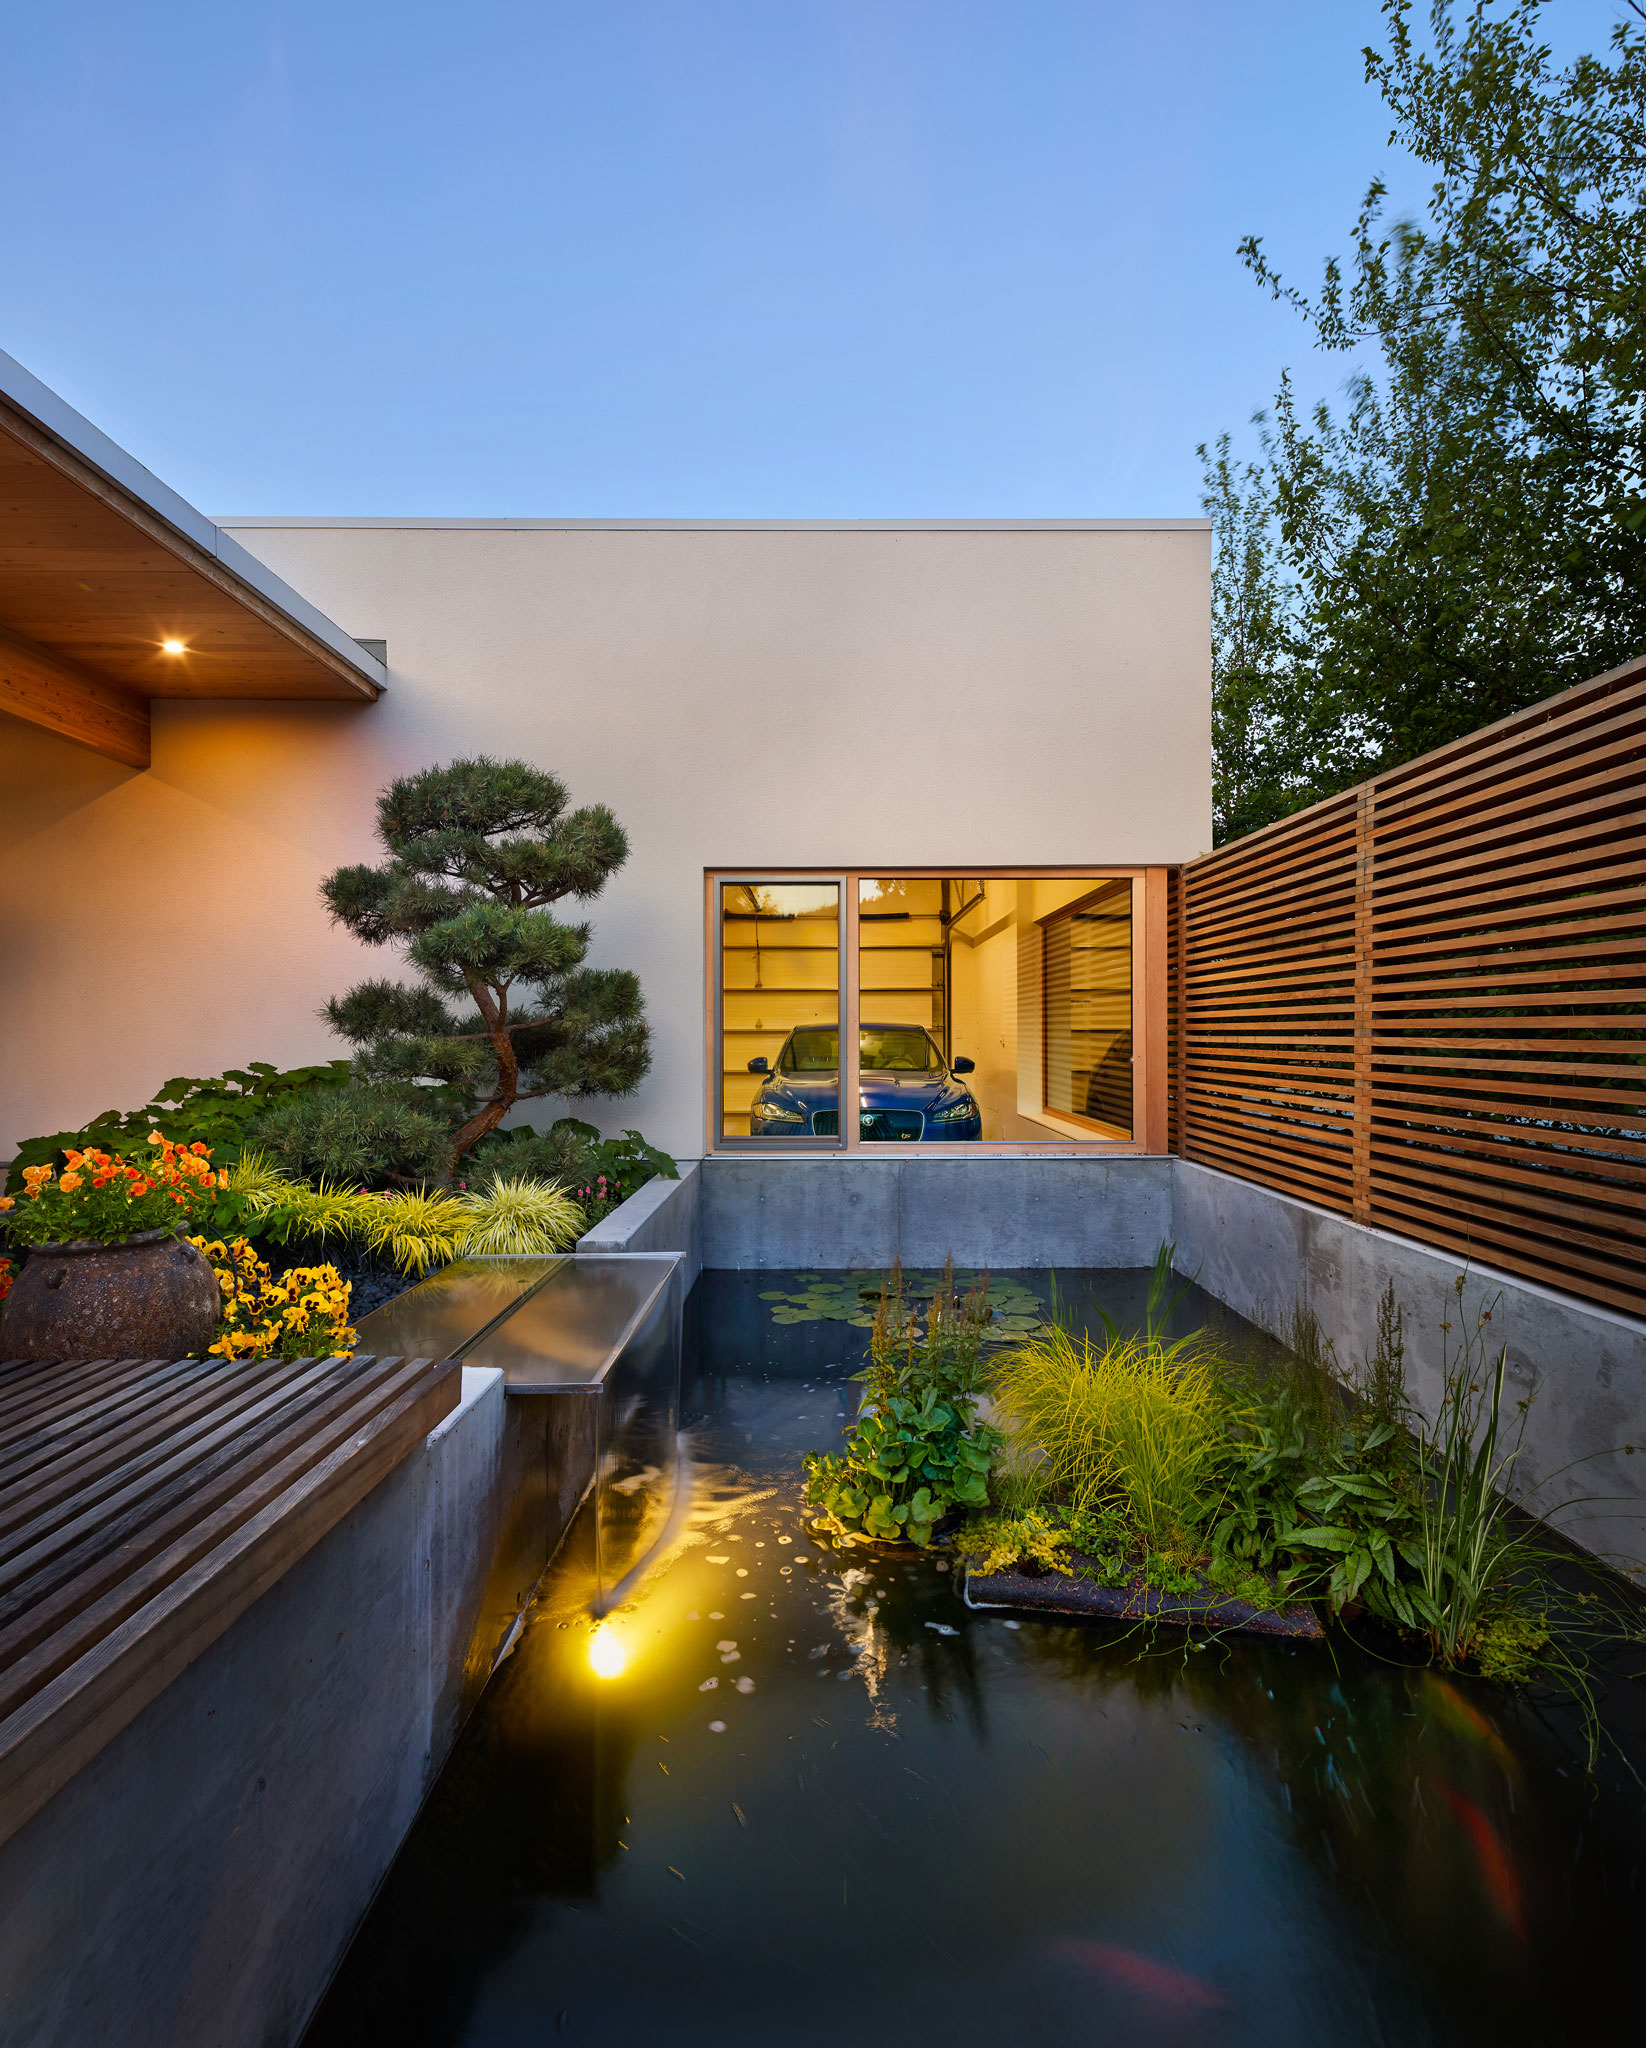 Entry View Of Modern Home With Koi Pond And Garage